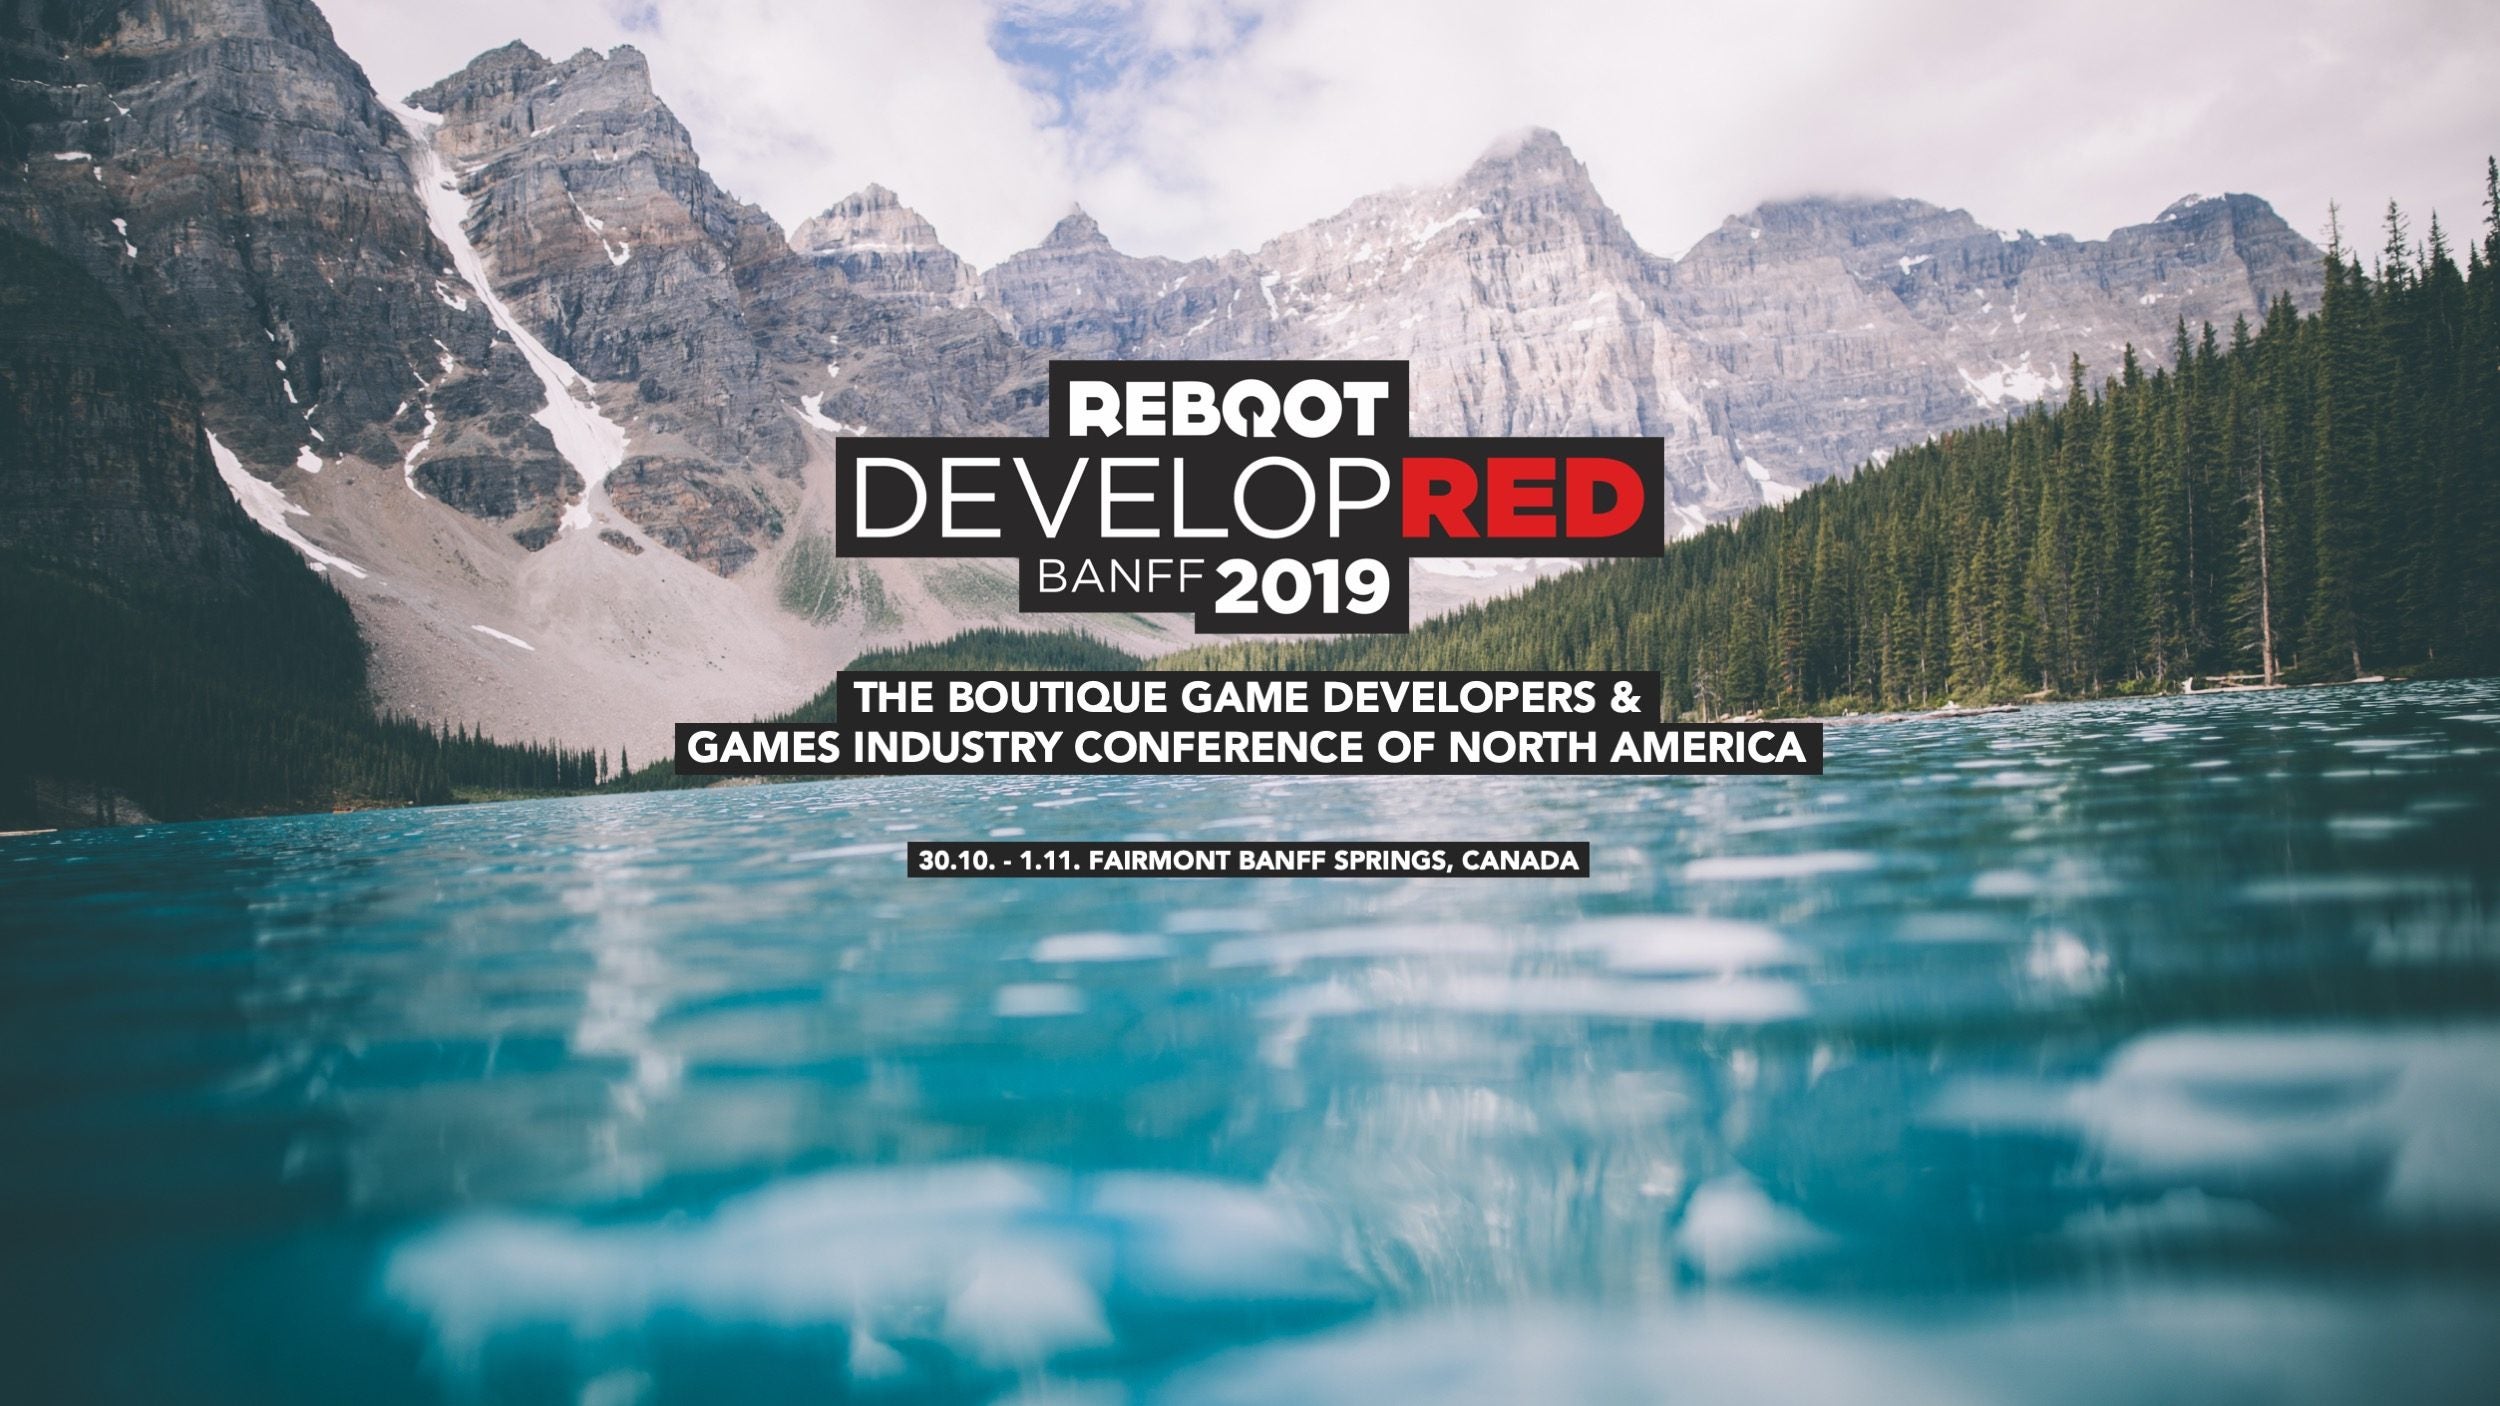 Image for Hinterland, Ubisoft, EA and Bungie join Reboot Develop Red line-up